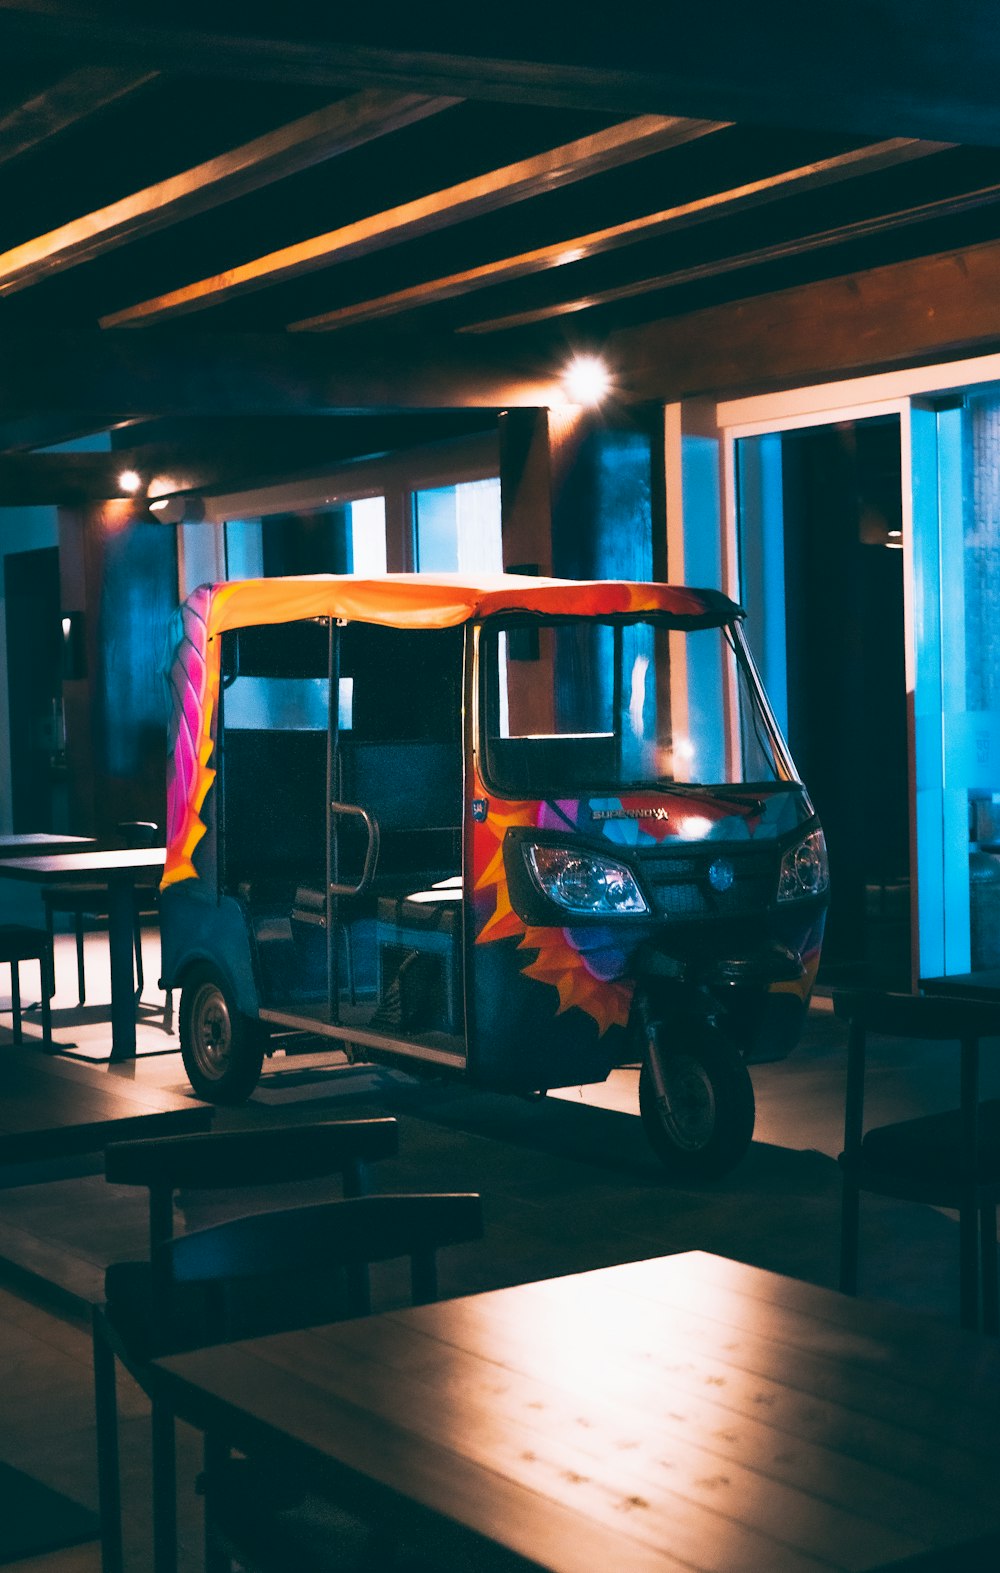 a brightly colored vehicle parked in a restaurant